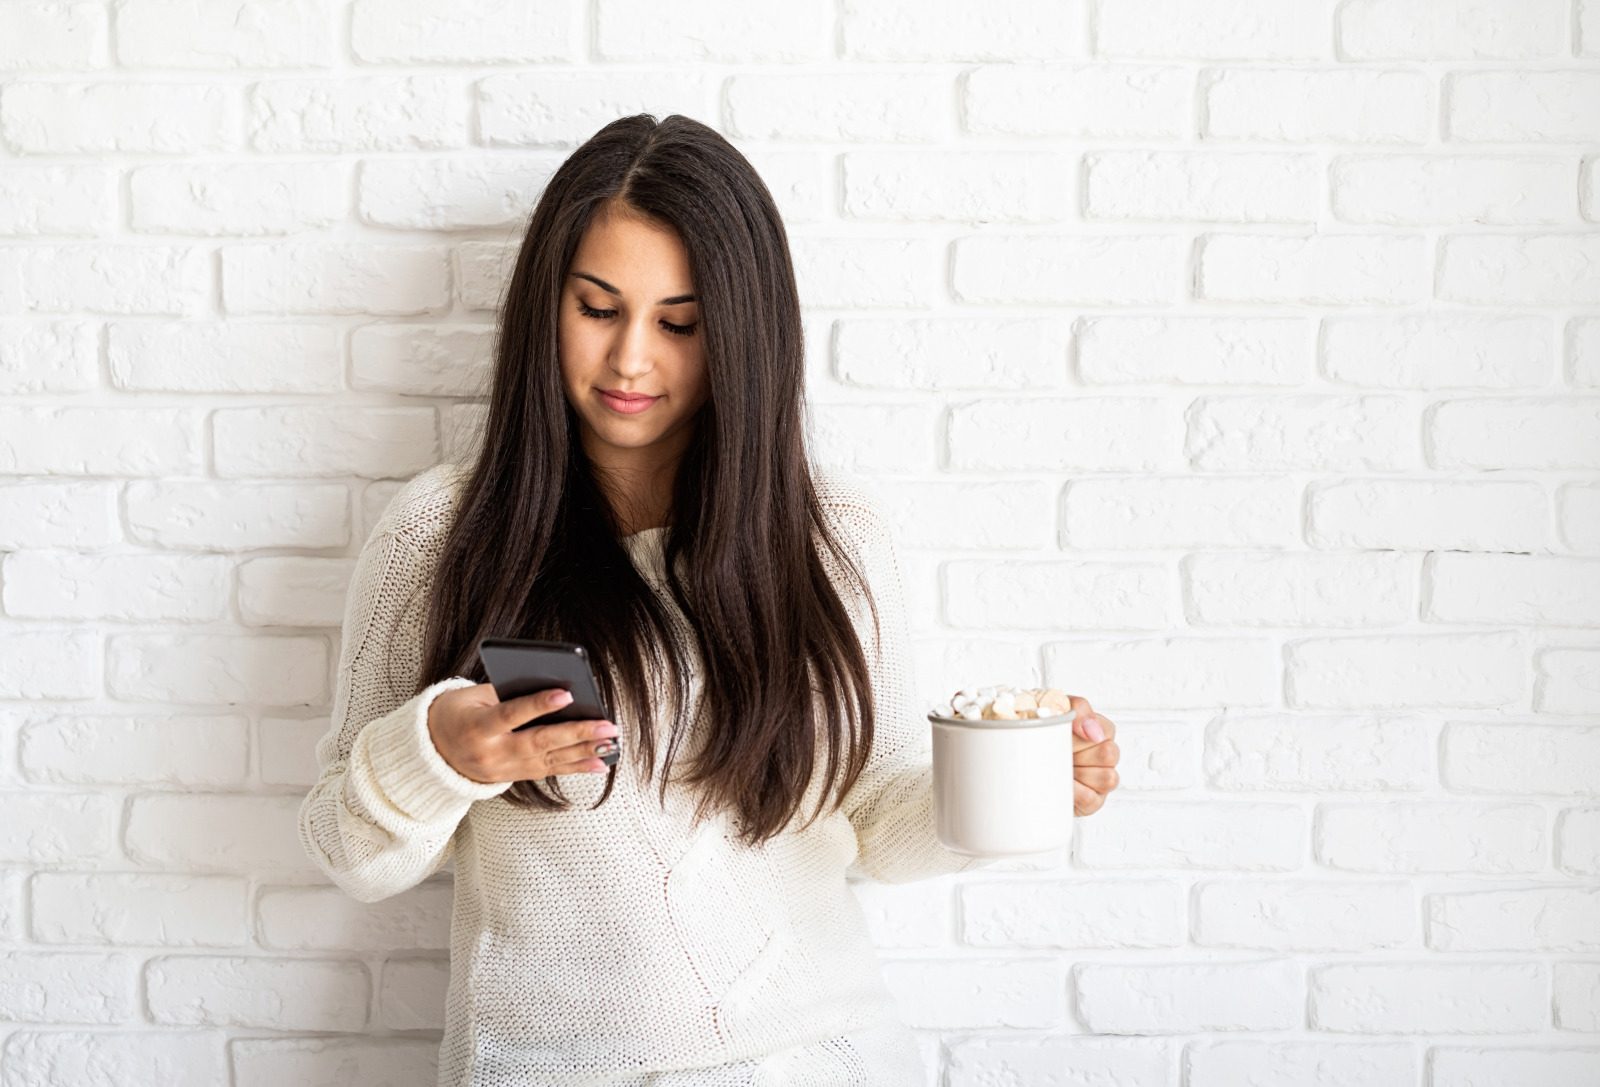 person with white sweater looking at phone